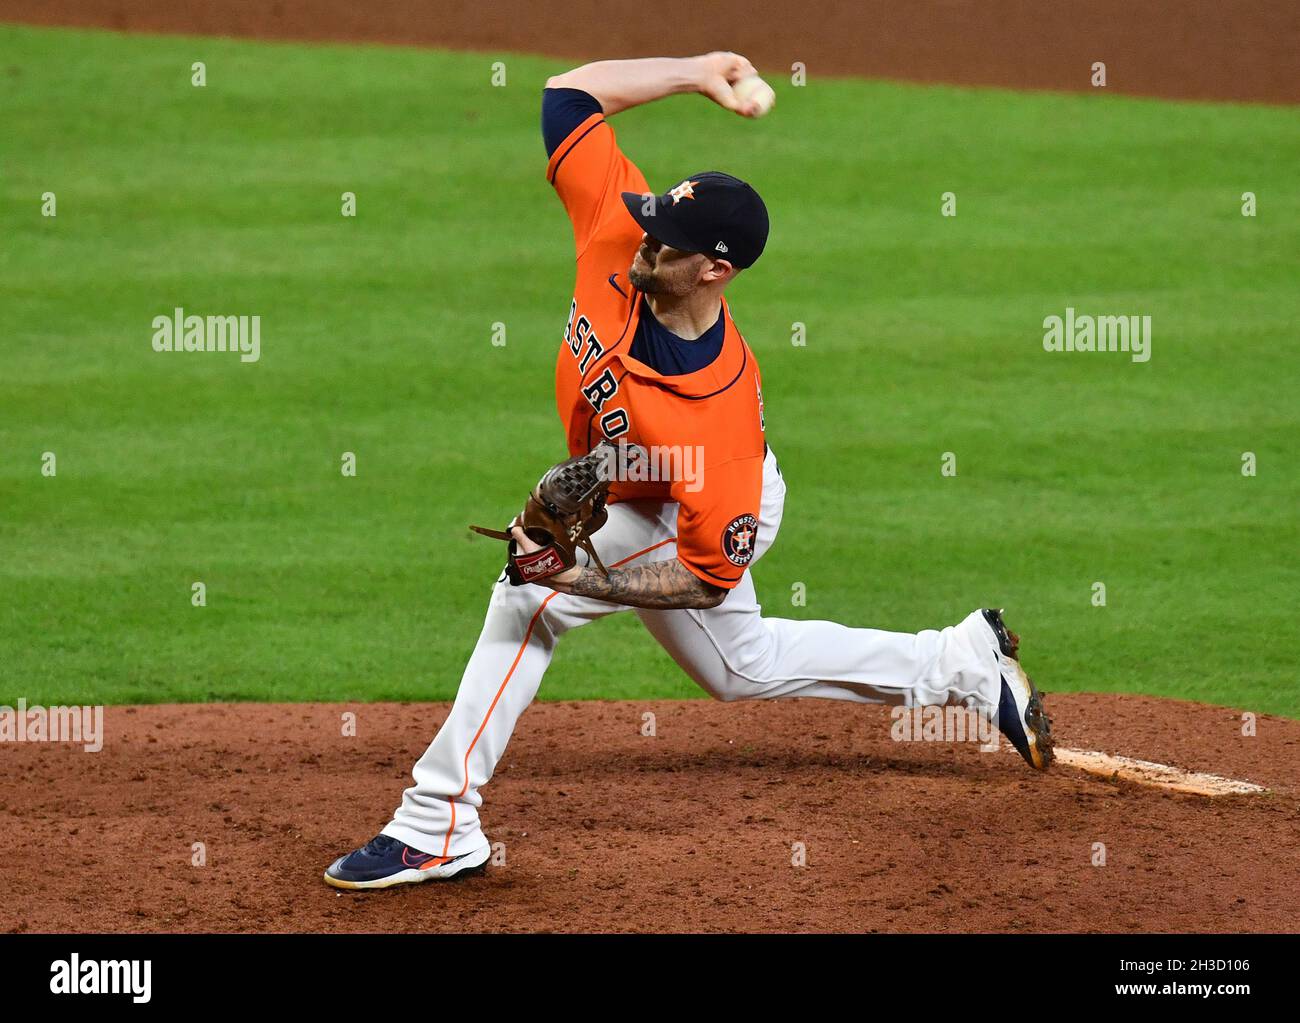 Houston, USA. 27th Oct, 2021. Houston Astros relief pitcher Ryan Pressly  throws in the 8th inning in game two against the Atlanta Braves in the MLB World  Series at Minute Maid Park